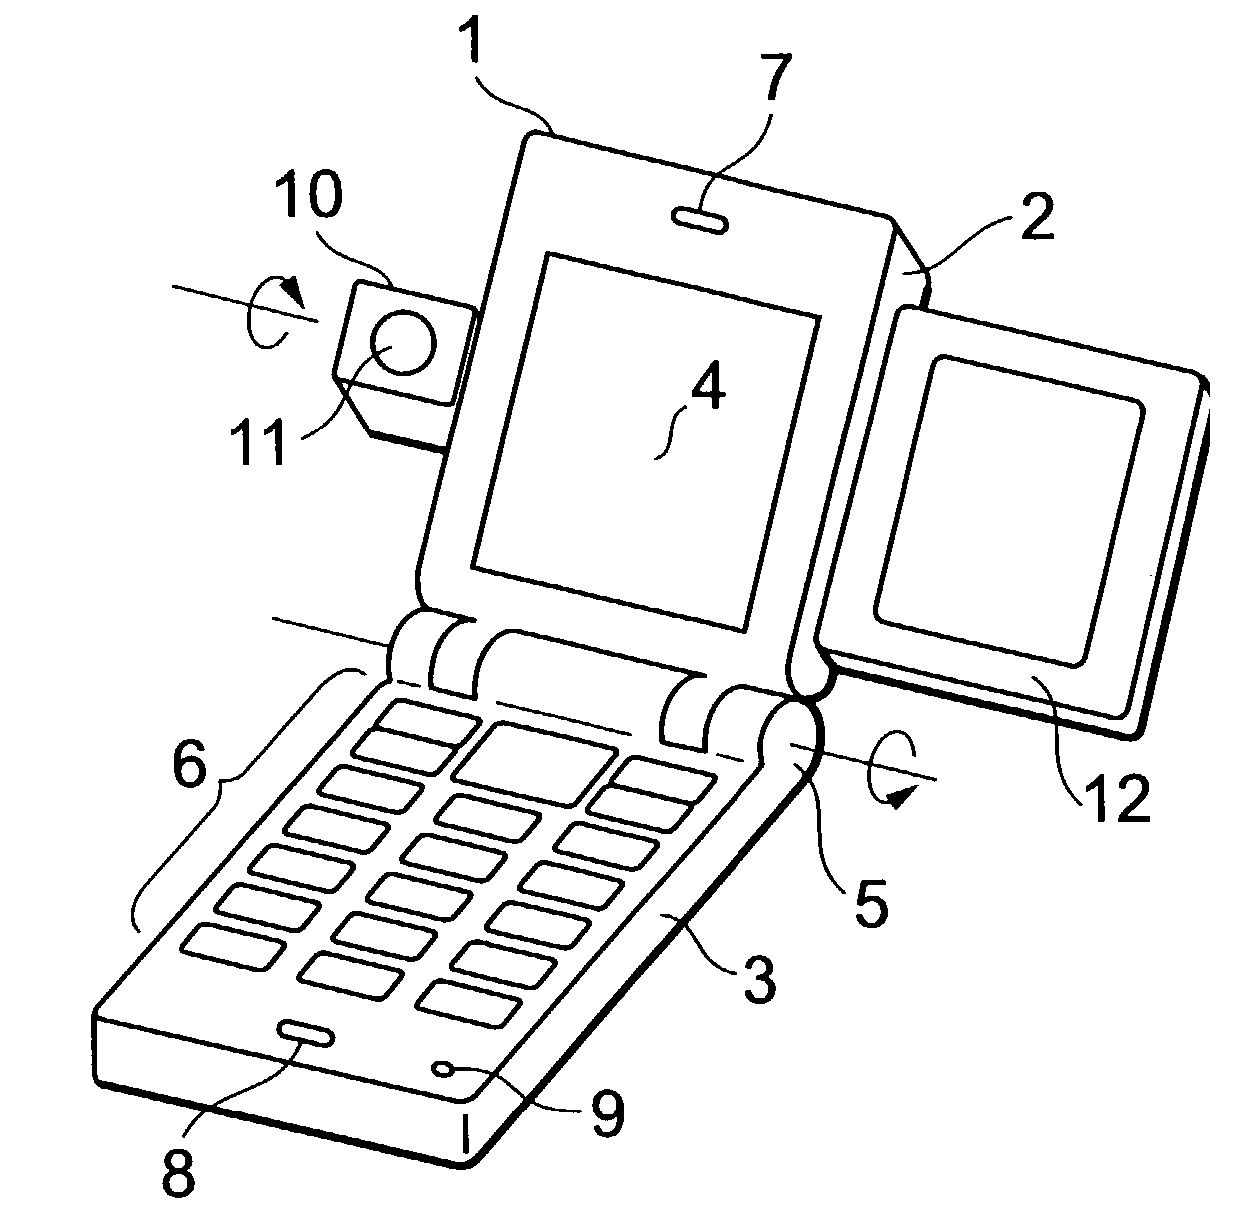 Portable information terminal comprising a camera with a fixed and movable display